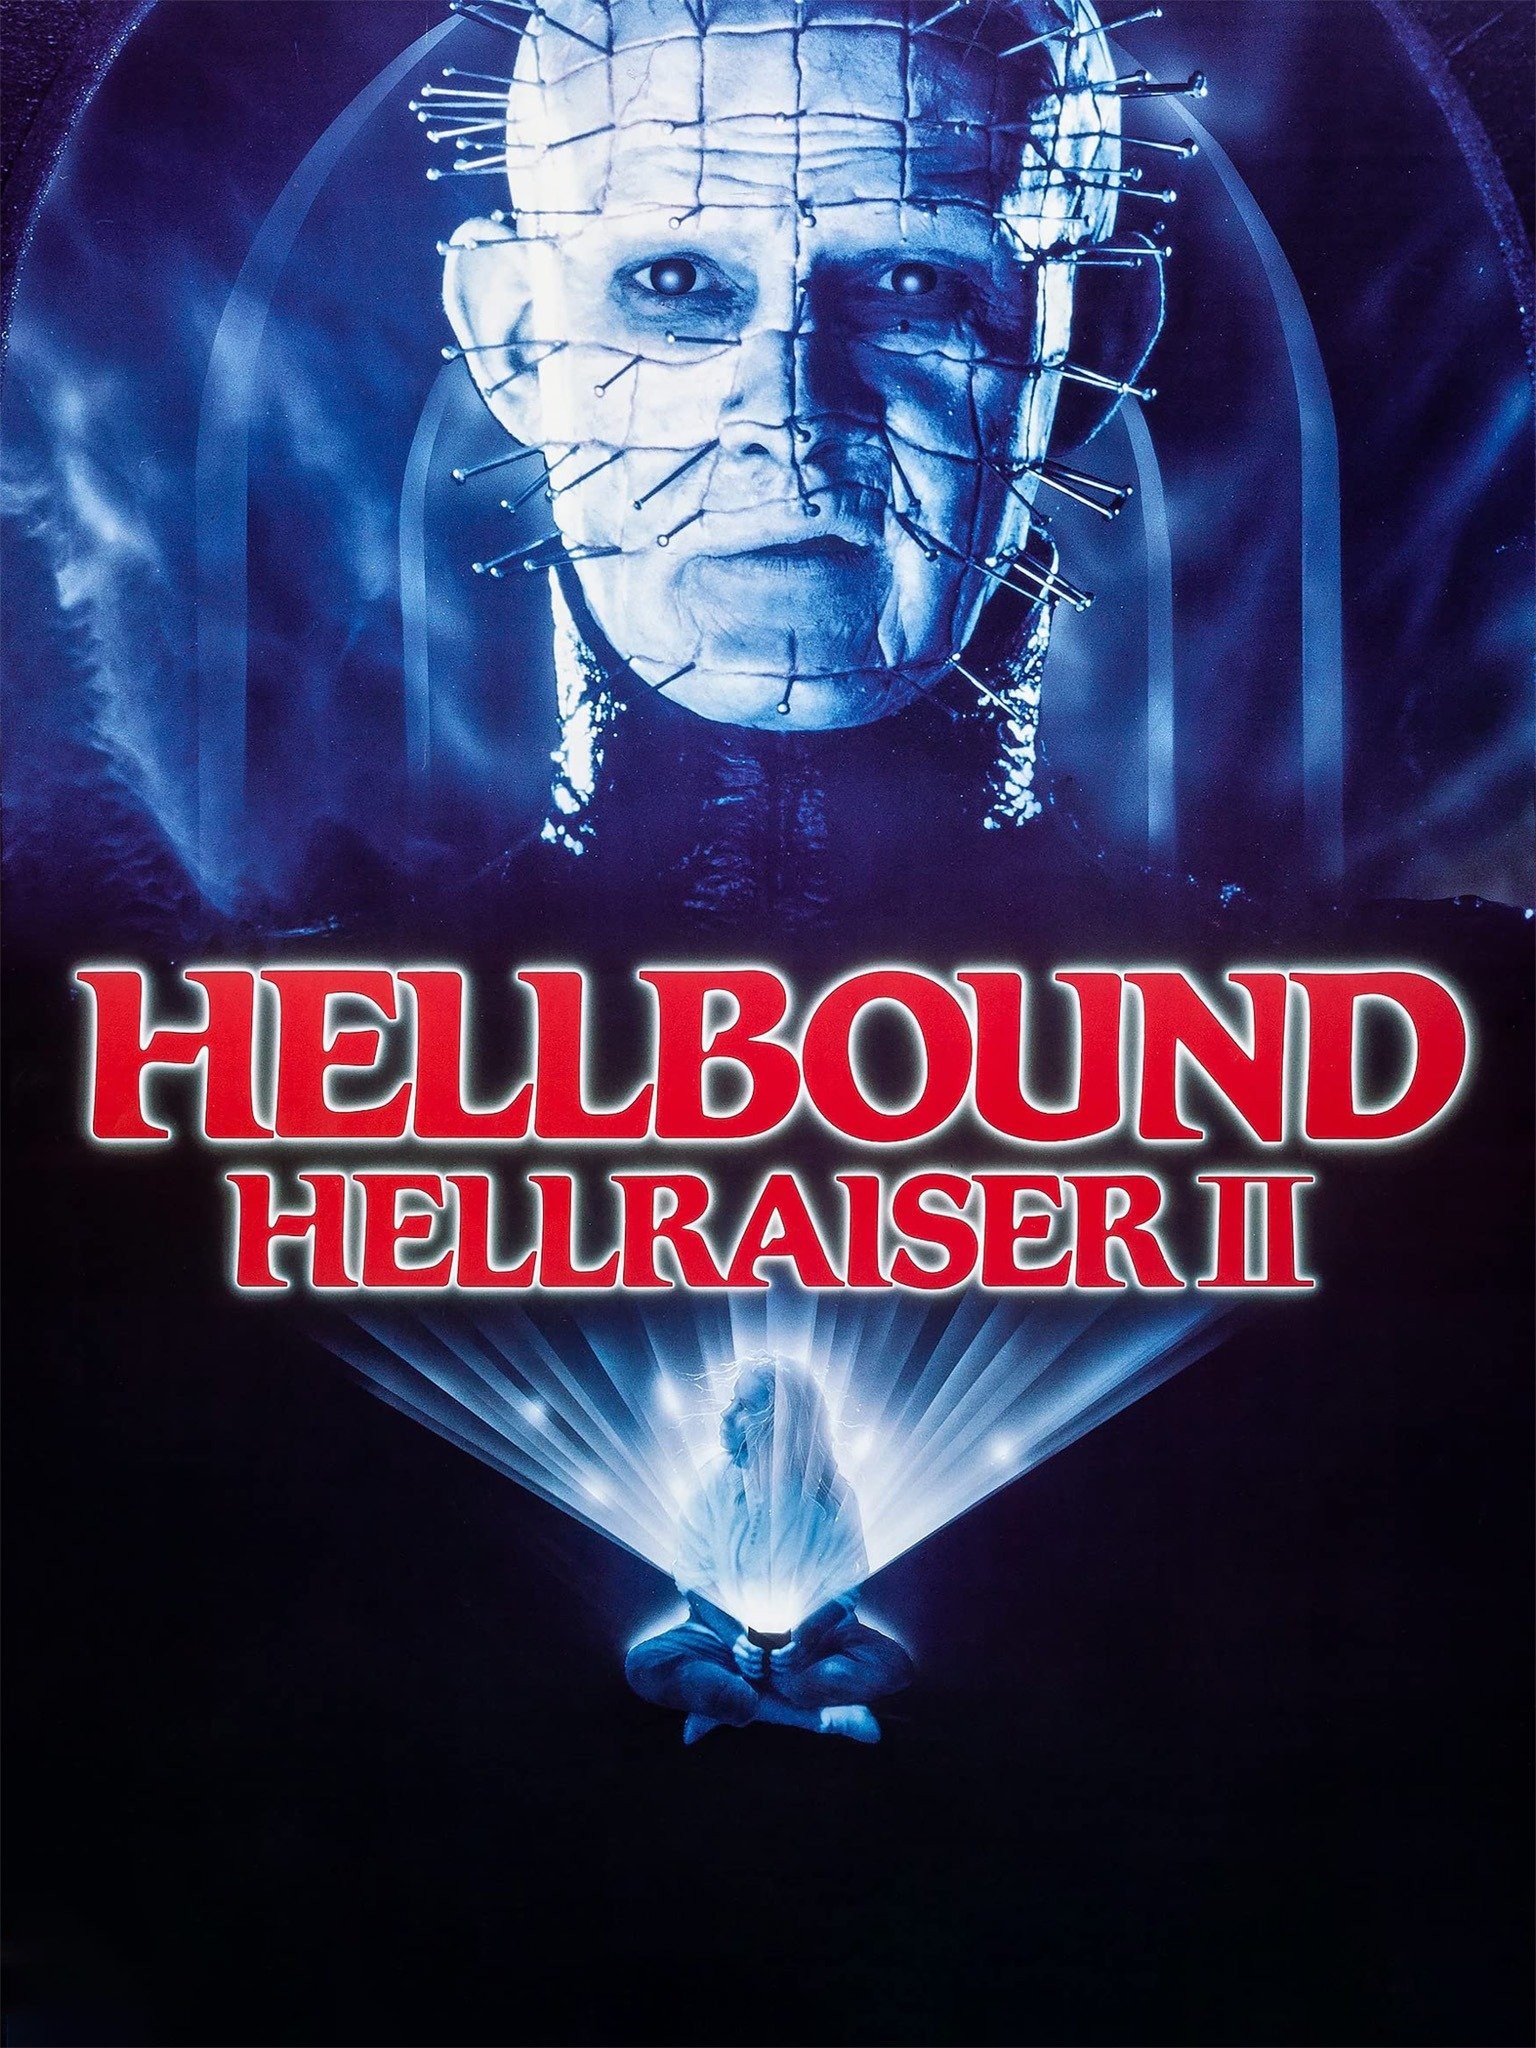 Hellbound, Season 2 Now in Production